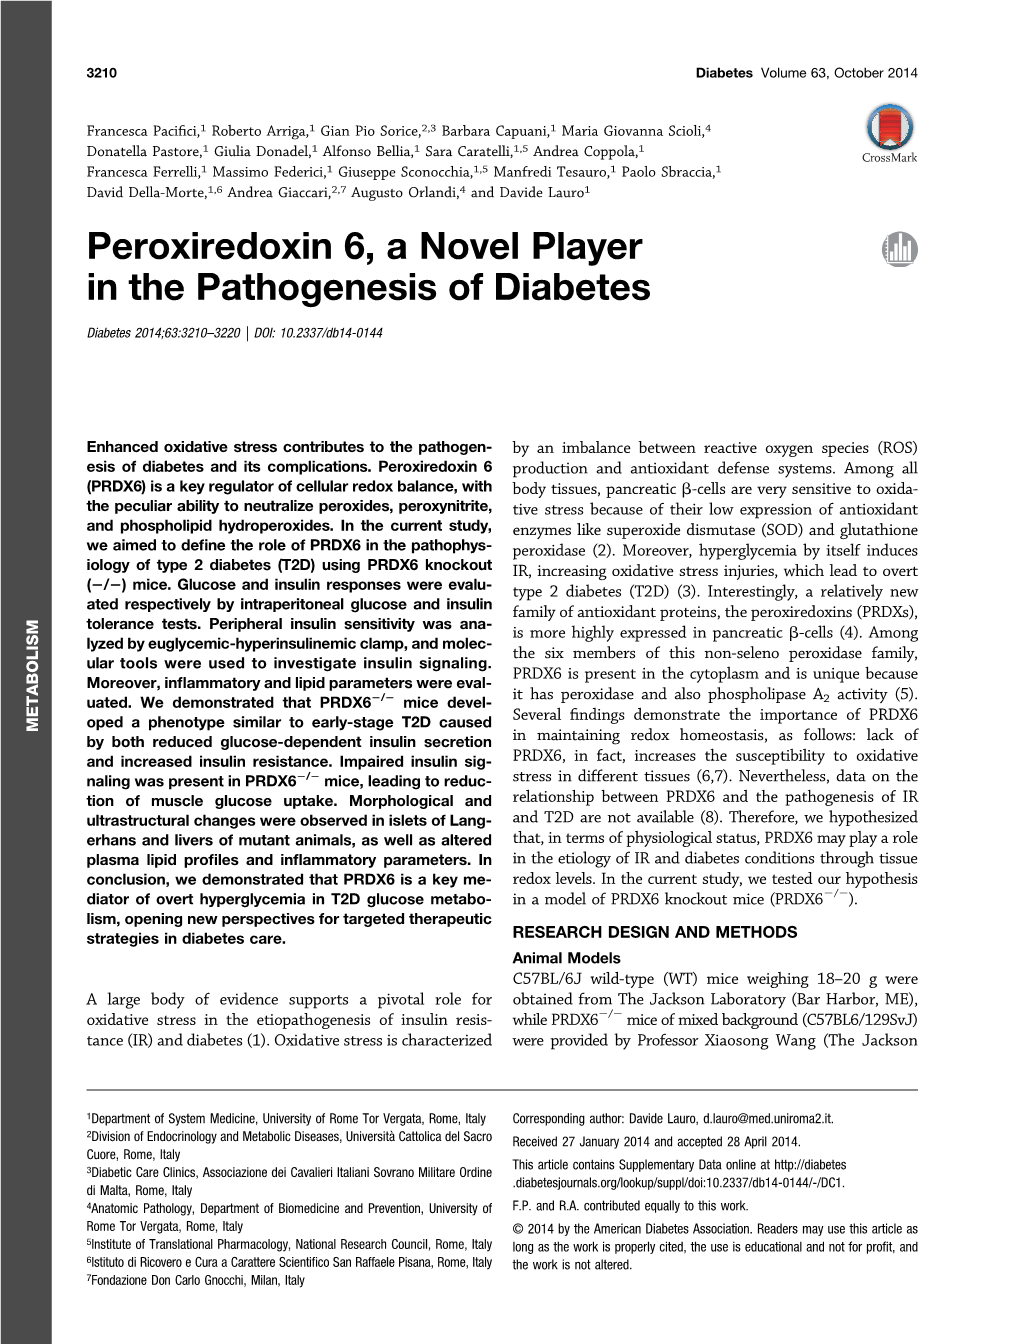 Peroxiredoxin 6, a Novel Player in the Pathogenesis of Diabetes